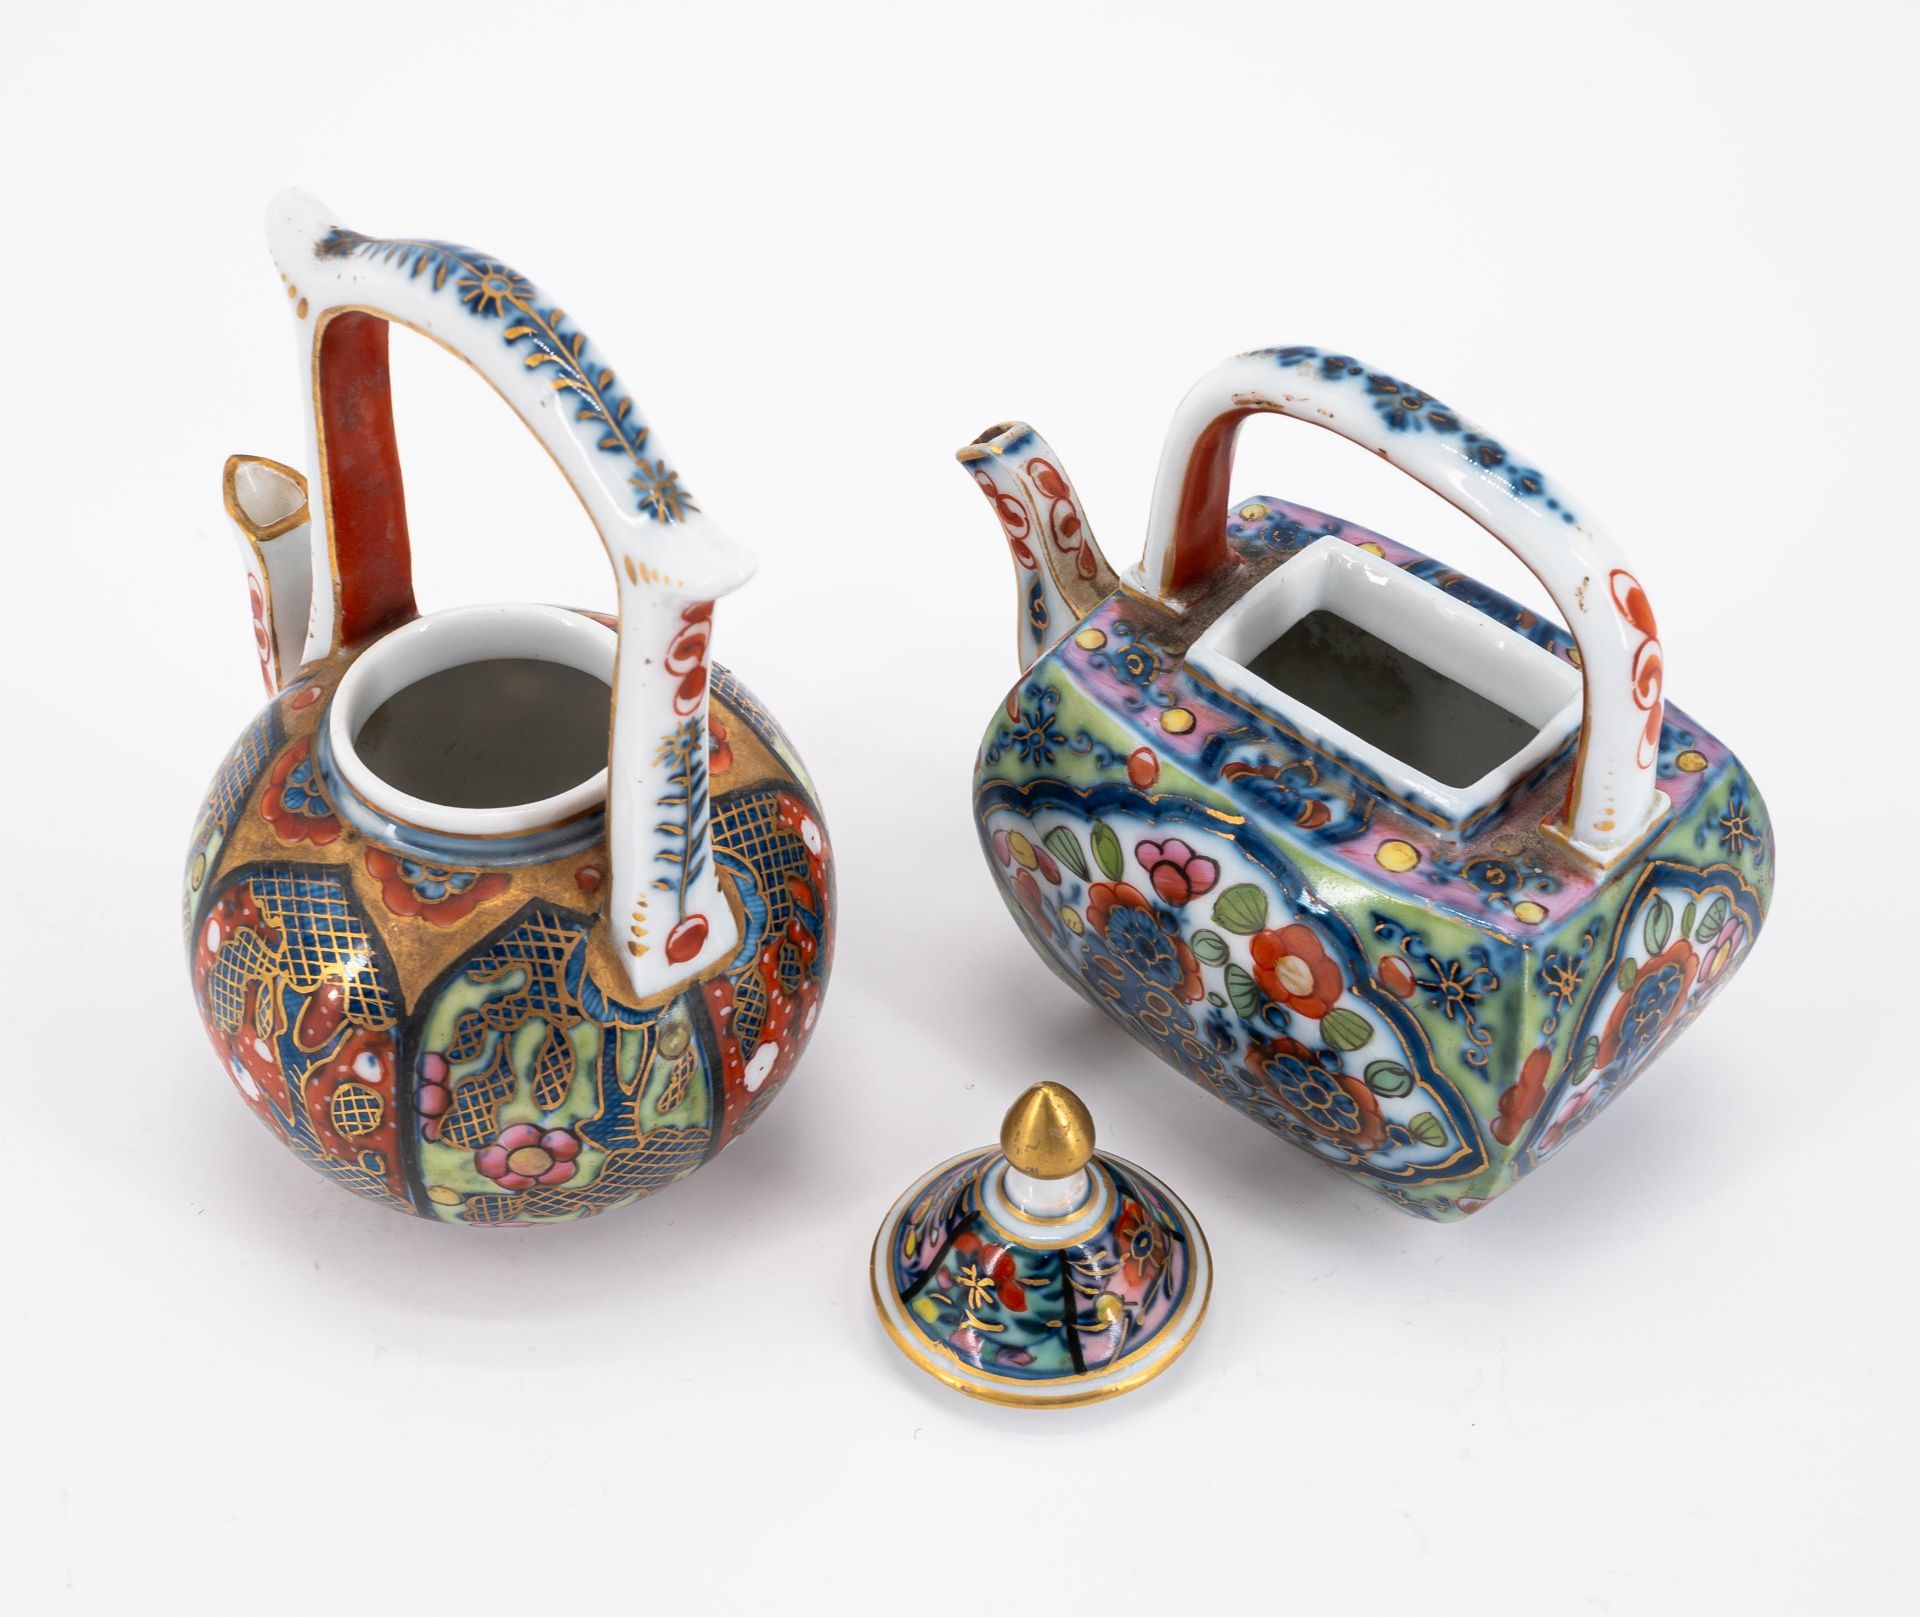 Meissen: ENSEMBLE OF TWO SMALL PORCELAIN TEA POTS IN THE IMARI STYLE - Image 4 of 5